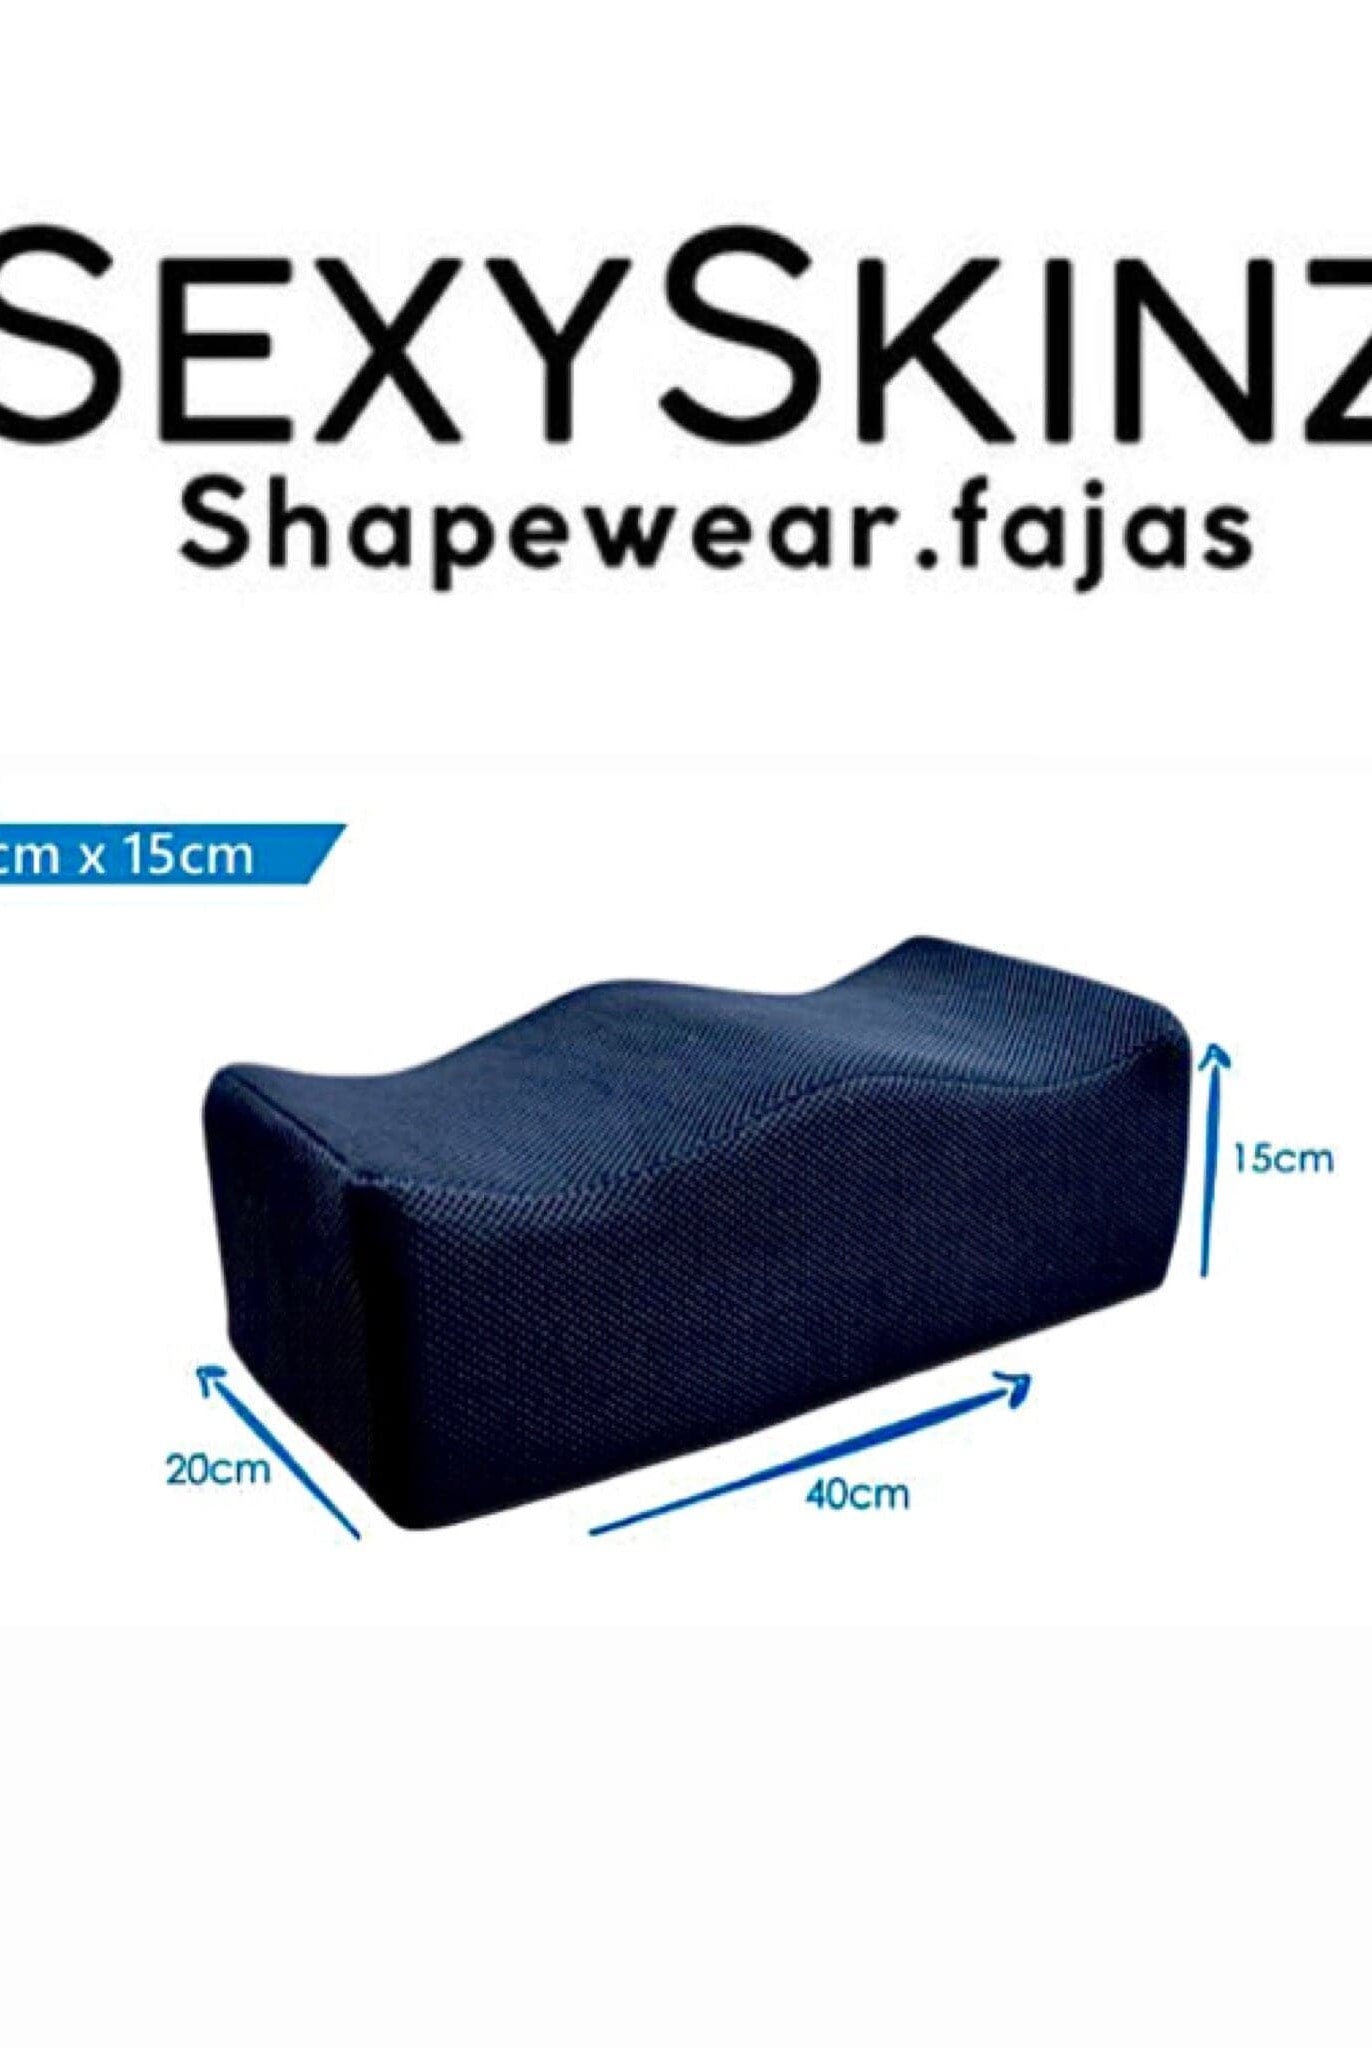 SEXYSKINZ Medical Grade BBL PILLOW is soft but firm enough to support high body weight with maximum comfort, carefully designed and manufactured with the high-end materials for ultimate assistance and long-lasting use.